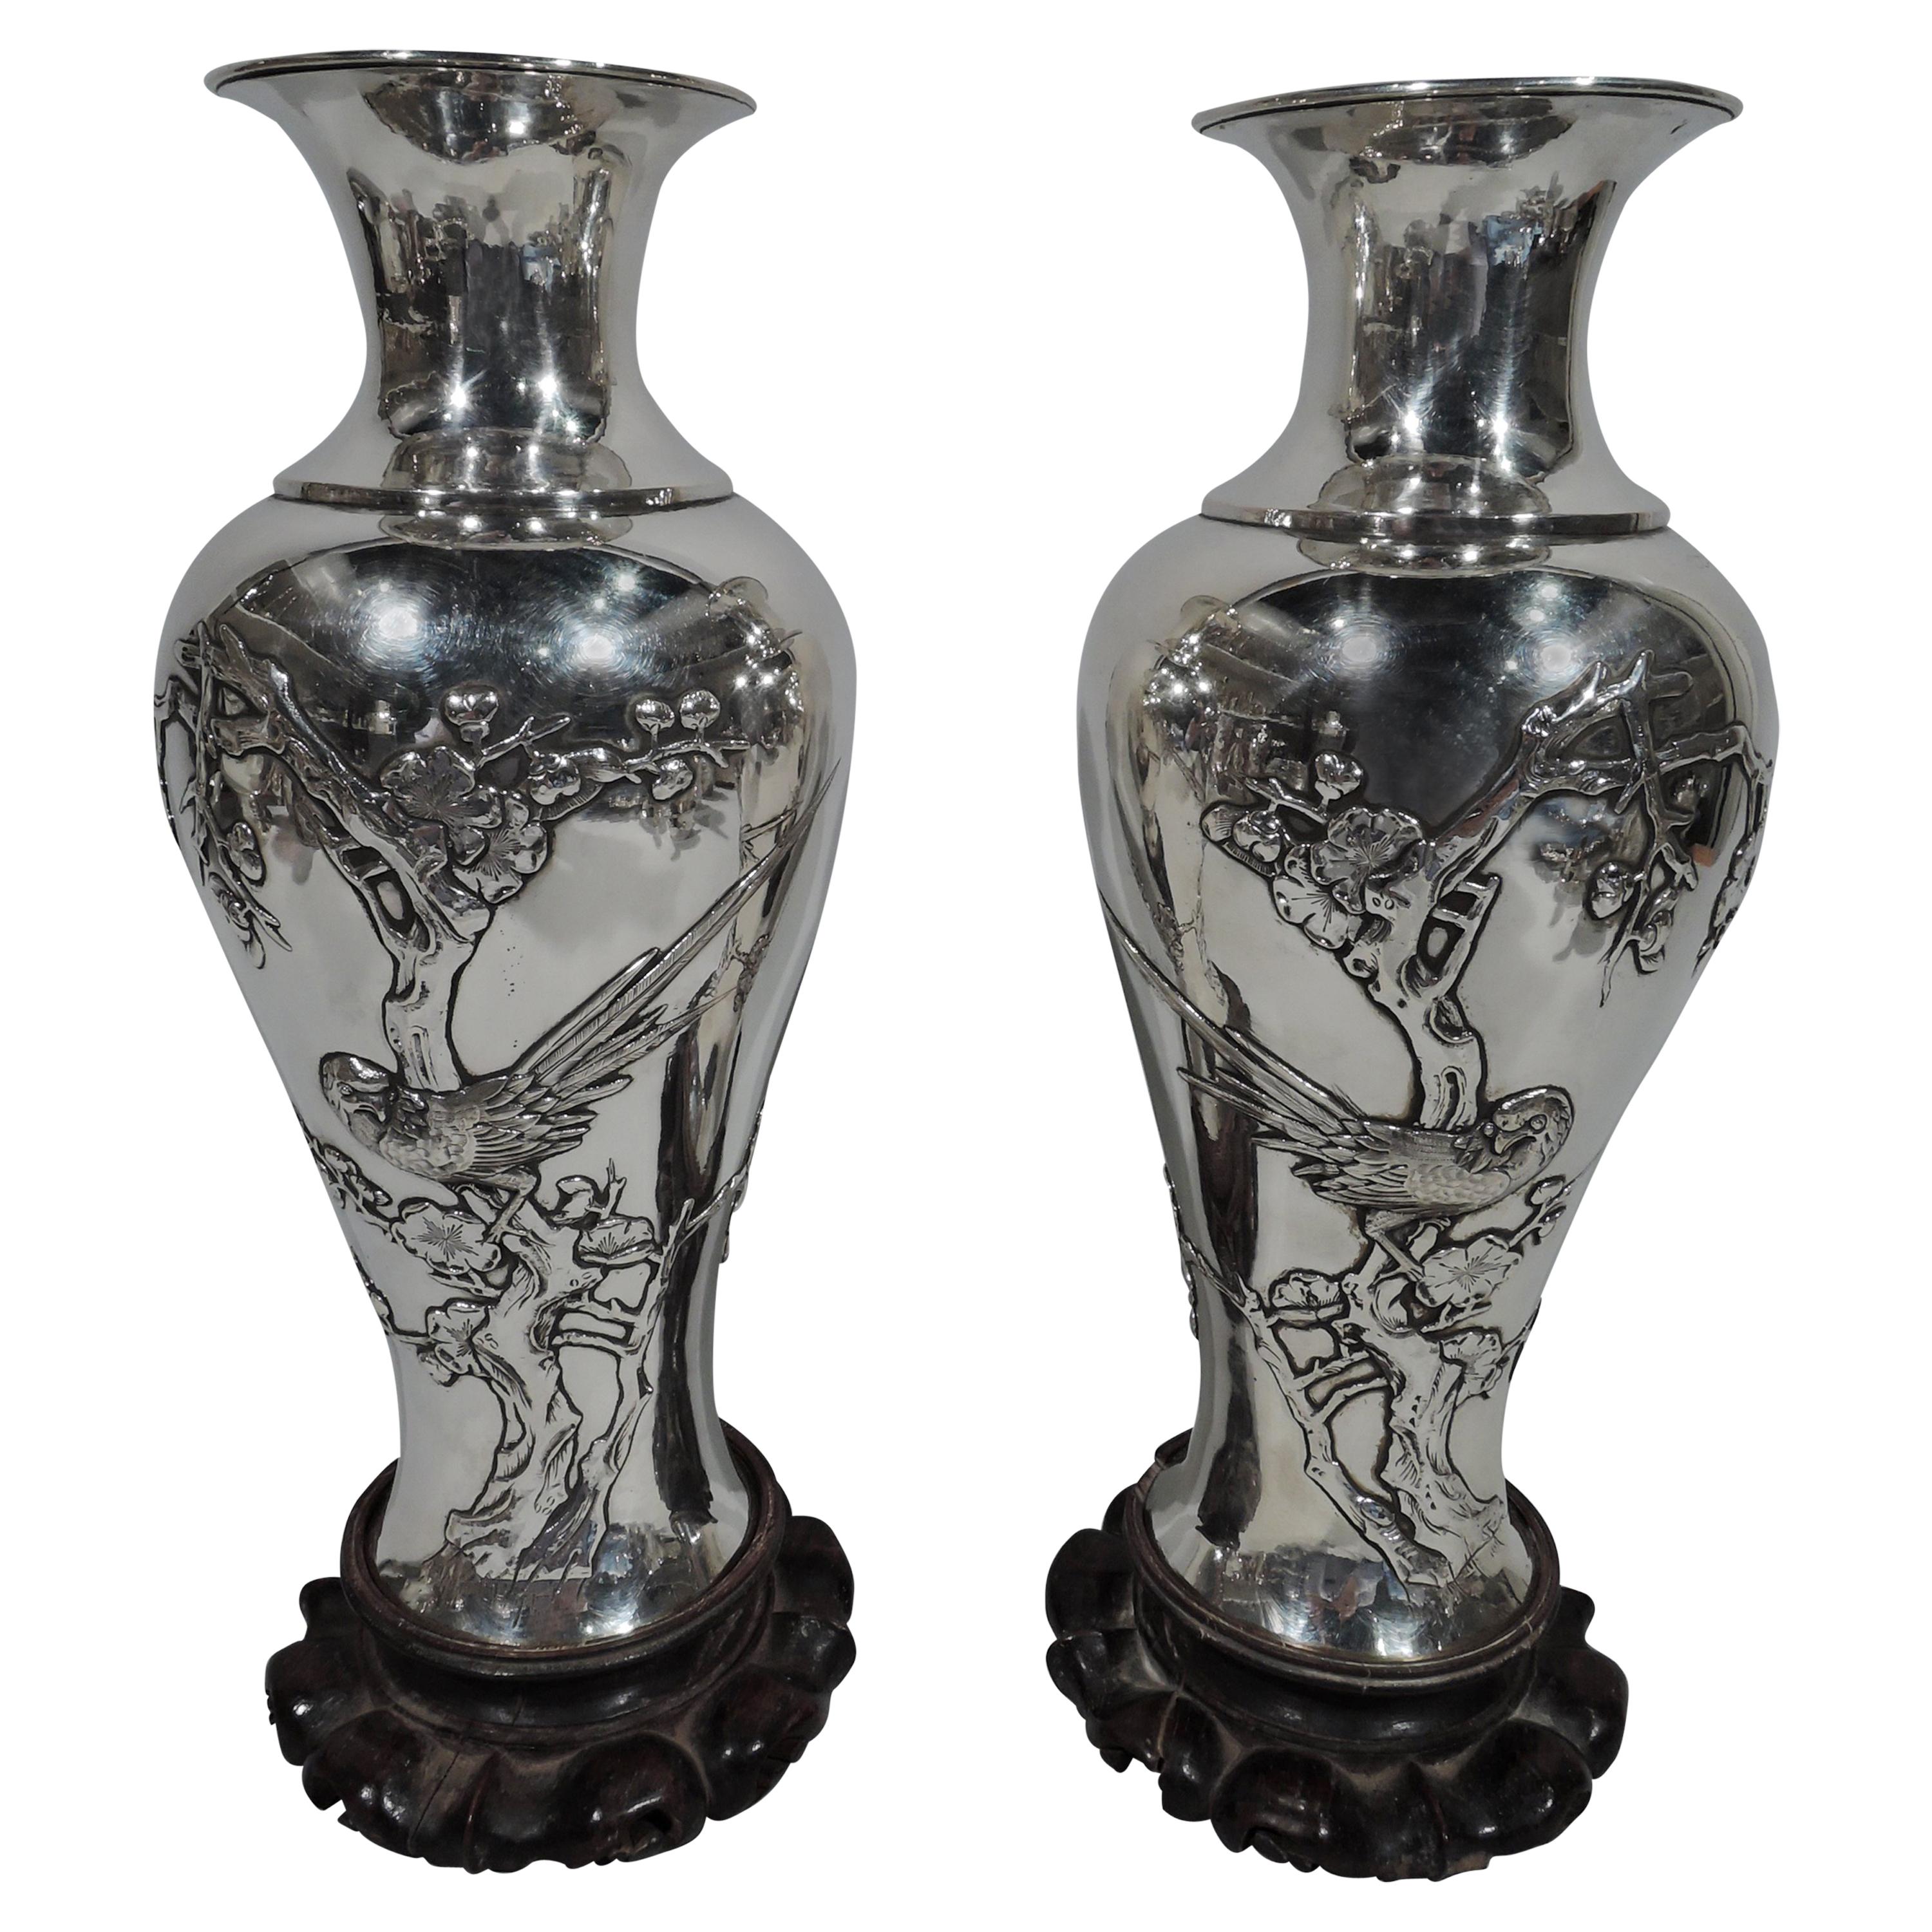 Pair of Antique Chinese Silver Vases with Blossoming Branches and Birds